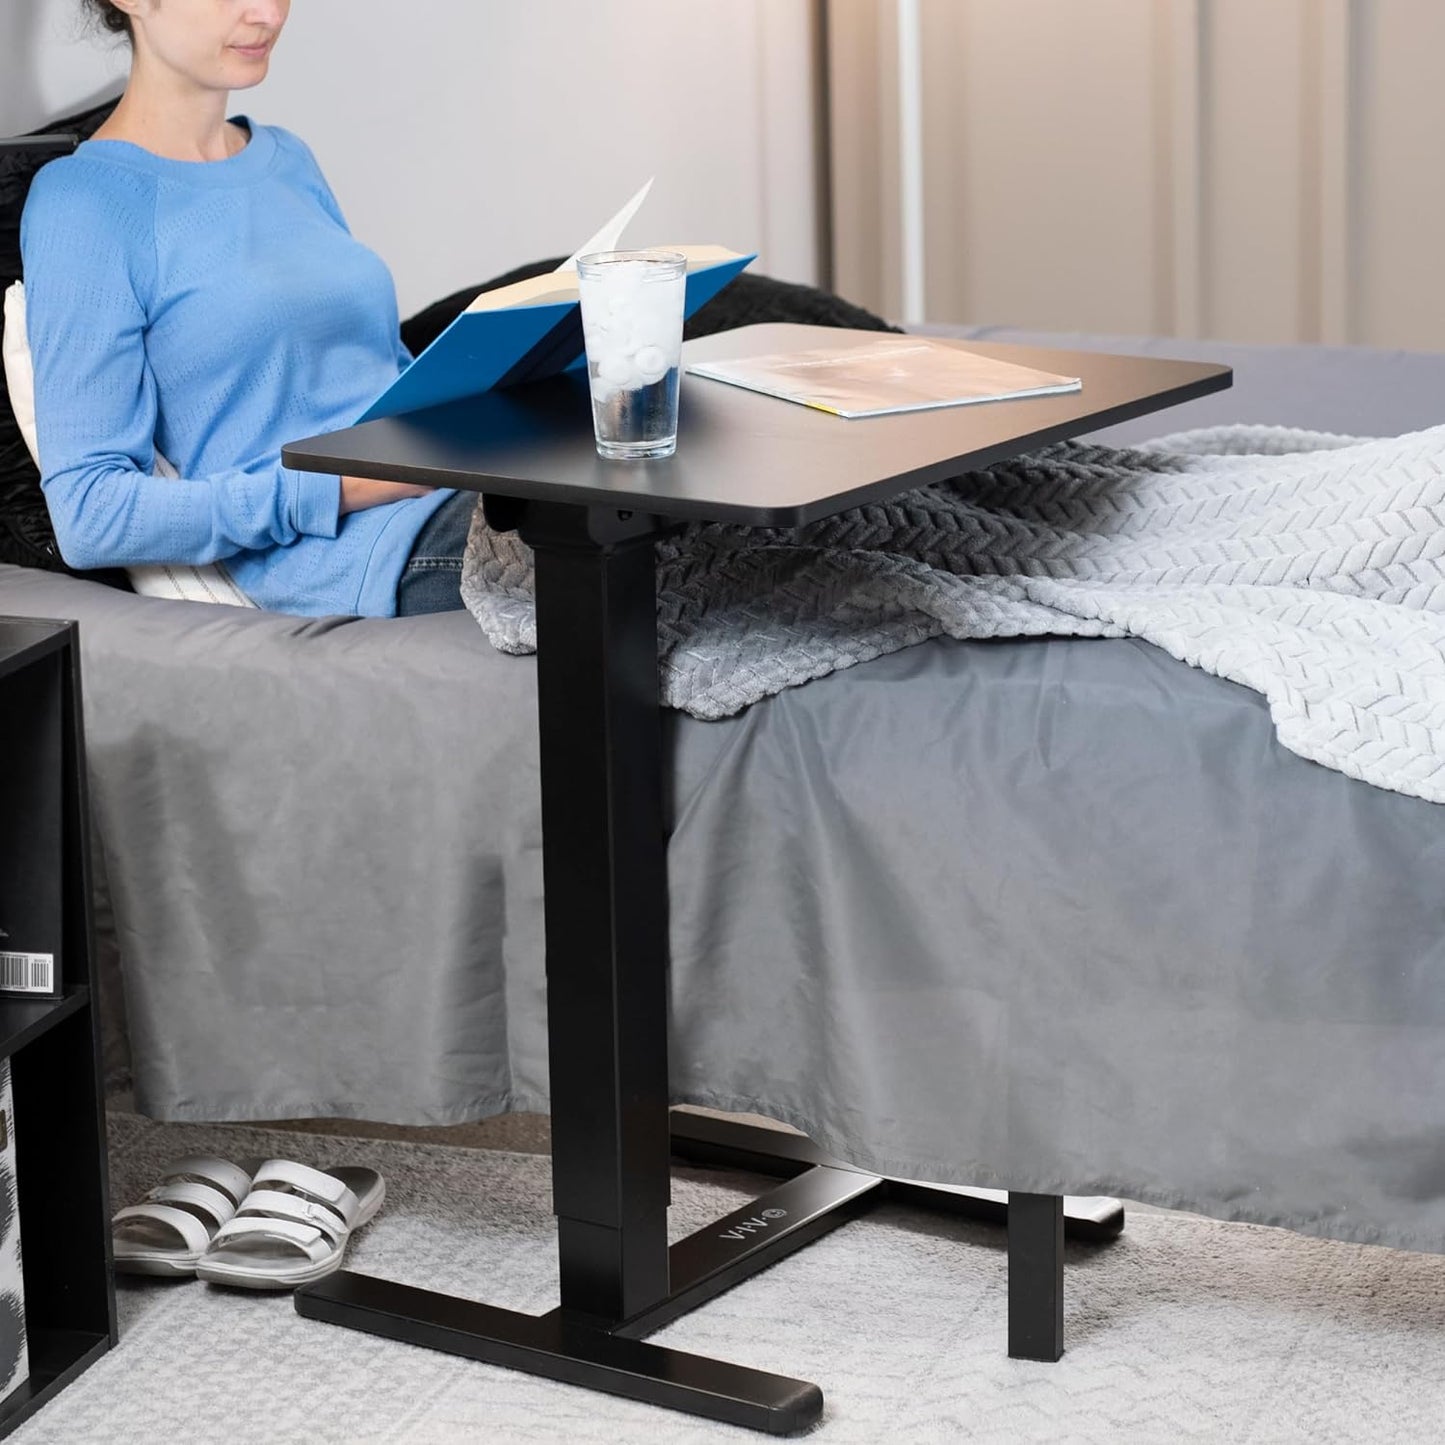 VIVO Electric 28 x 20 inch Overbed Table, Mobile Desktop with Hidden Casters, Height Adjustable Hospital Bed Table, Laptop Desk, Medical Sliding Tray, Black, CART-E1TB